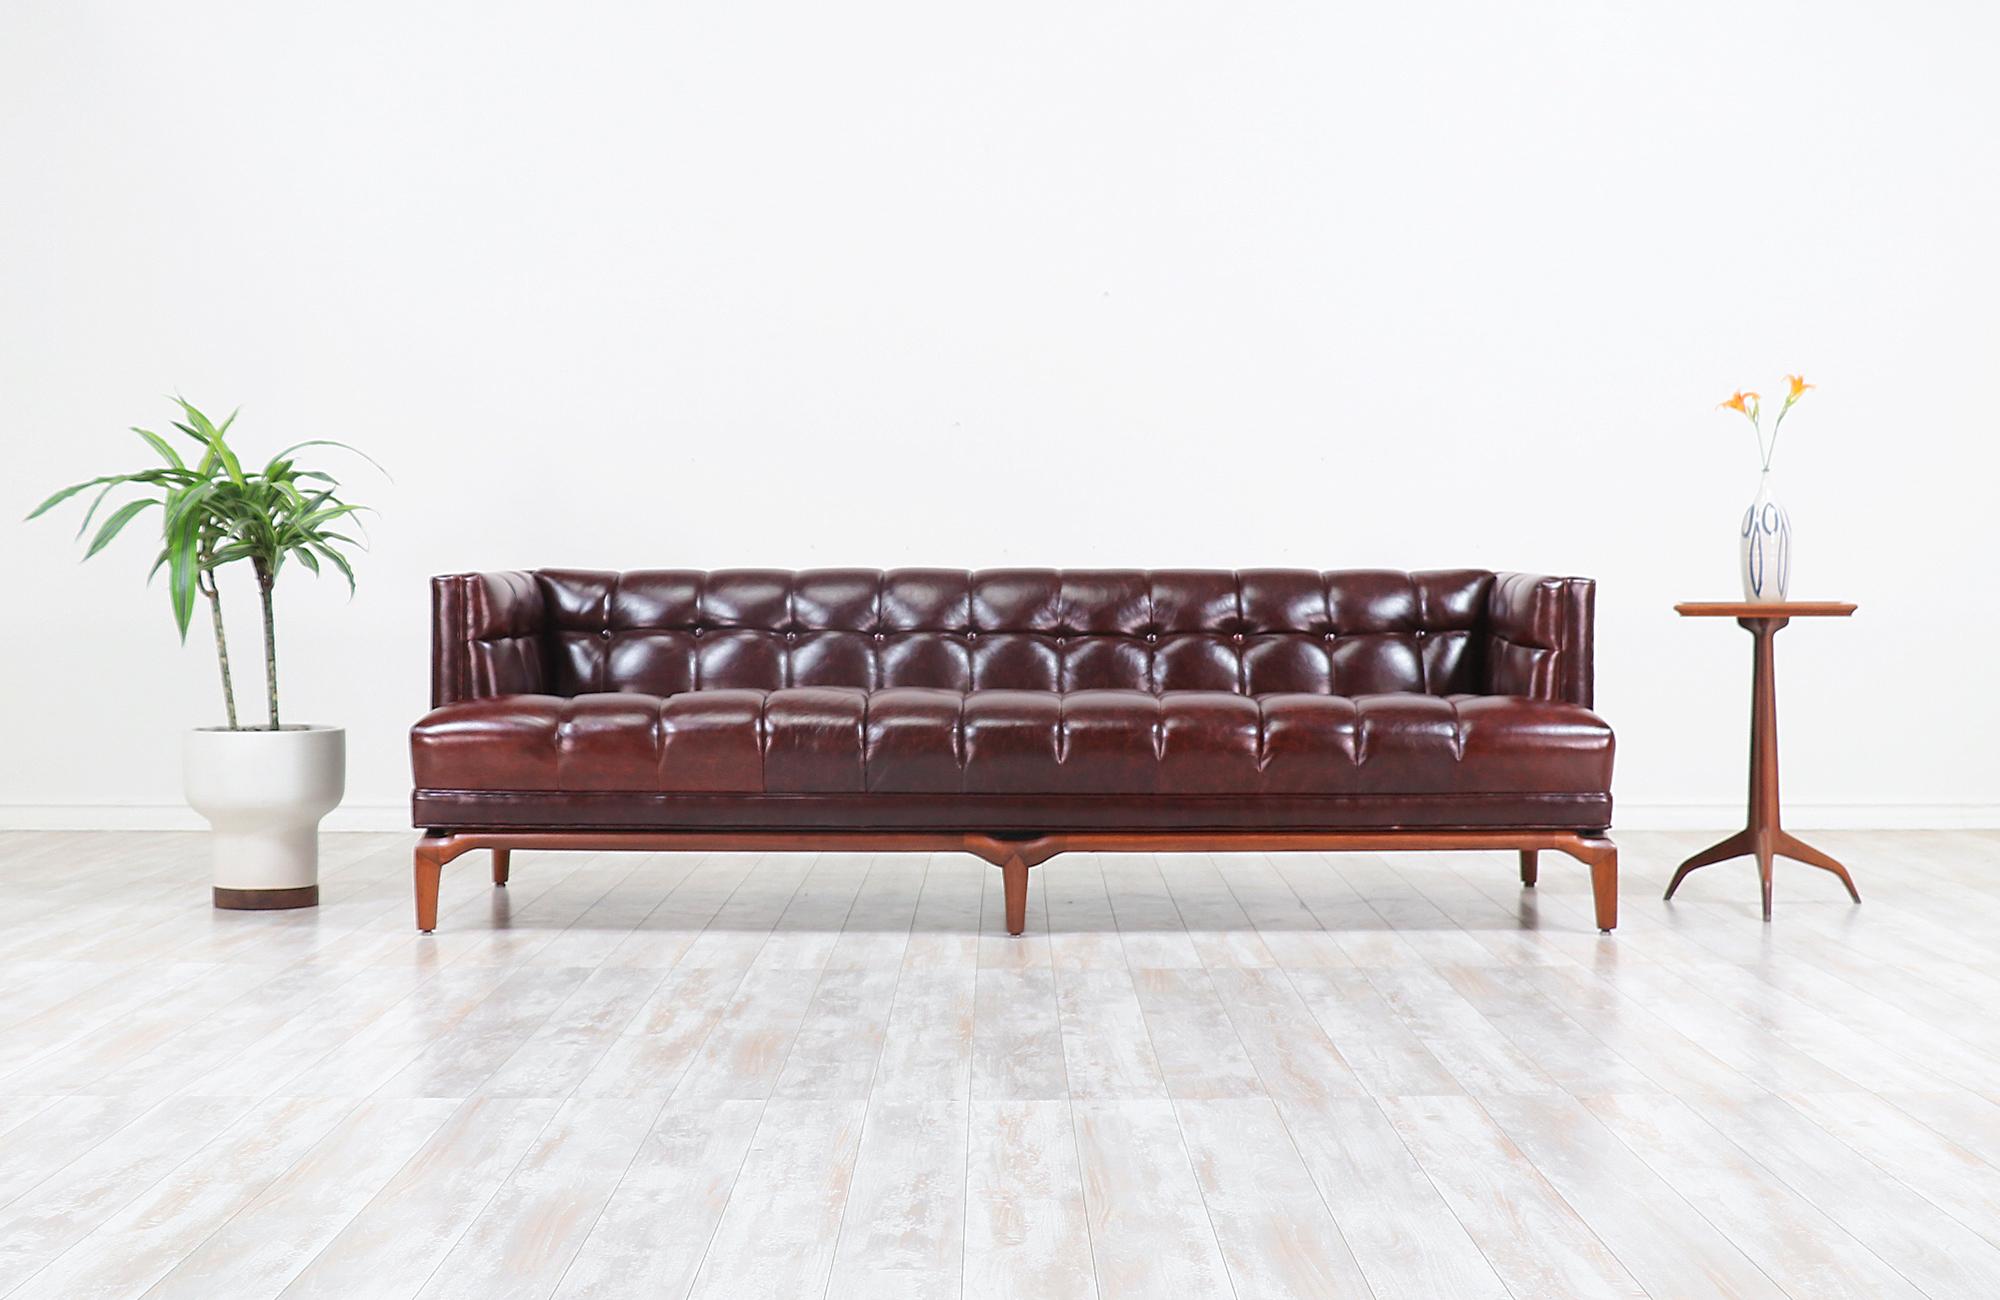 Fabulous biscuit tufted leather sofa designed by Maurice Bailey for Monteverdi-Young of Beverly Hills in the 1960s. This comfortable sofa is newly reupholstered in a full grain brown leather and set on a carved solid walnut wood base. Meticulously